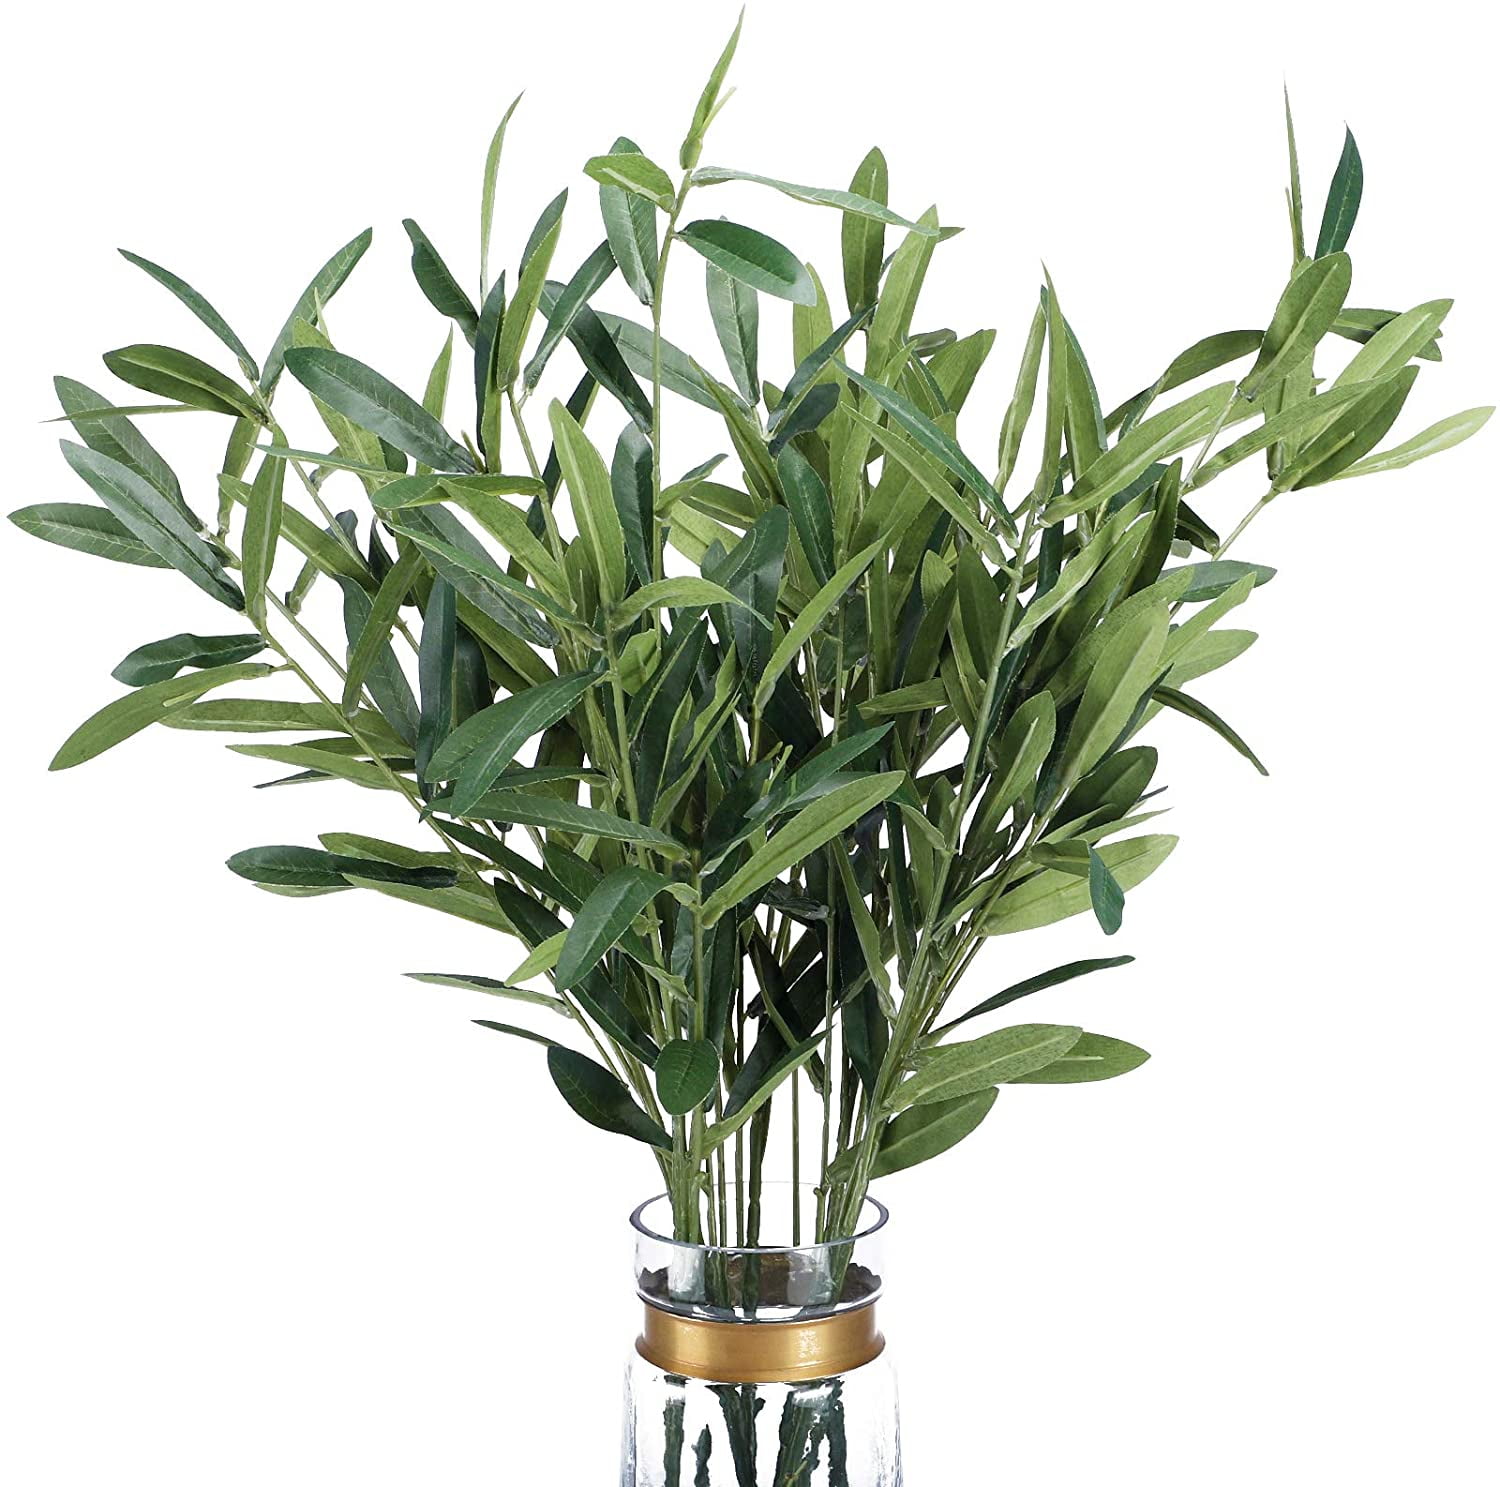 2/3/5PCS Artificial Fake Leaf Olive Tree Branch Green Plant Greenery Home Decor 